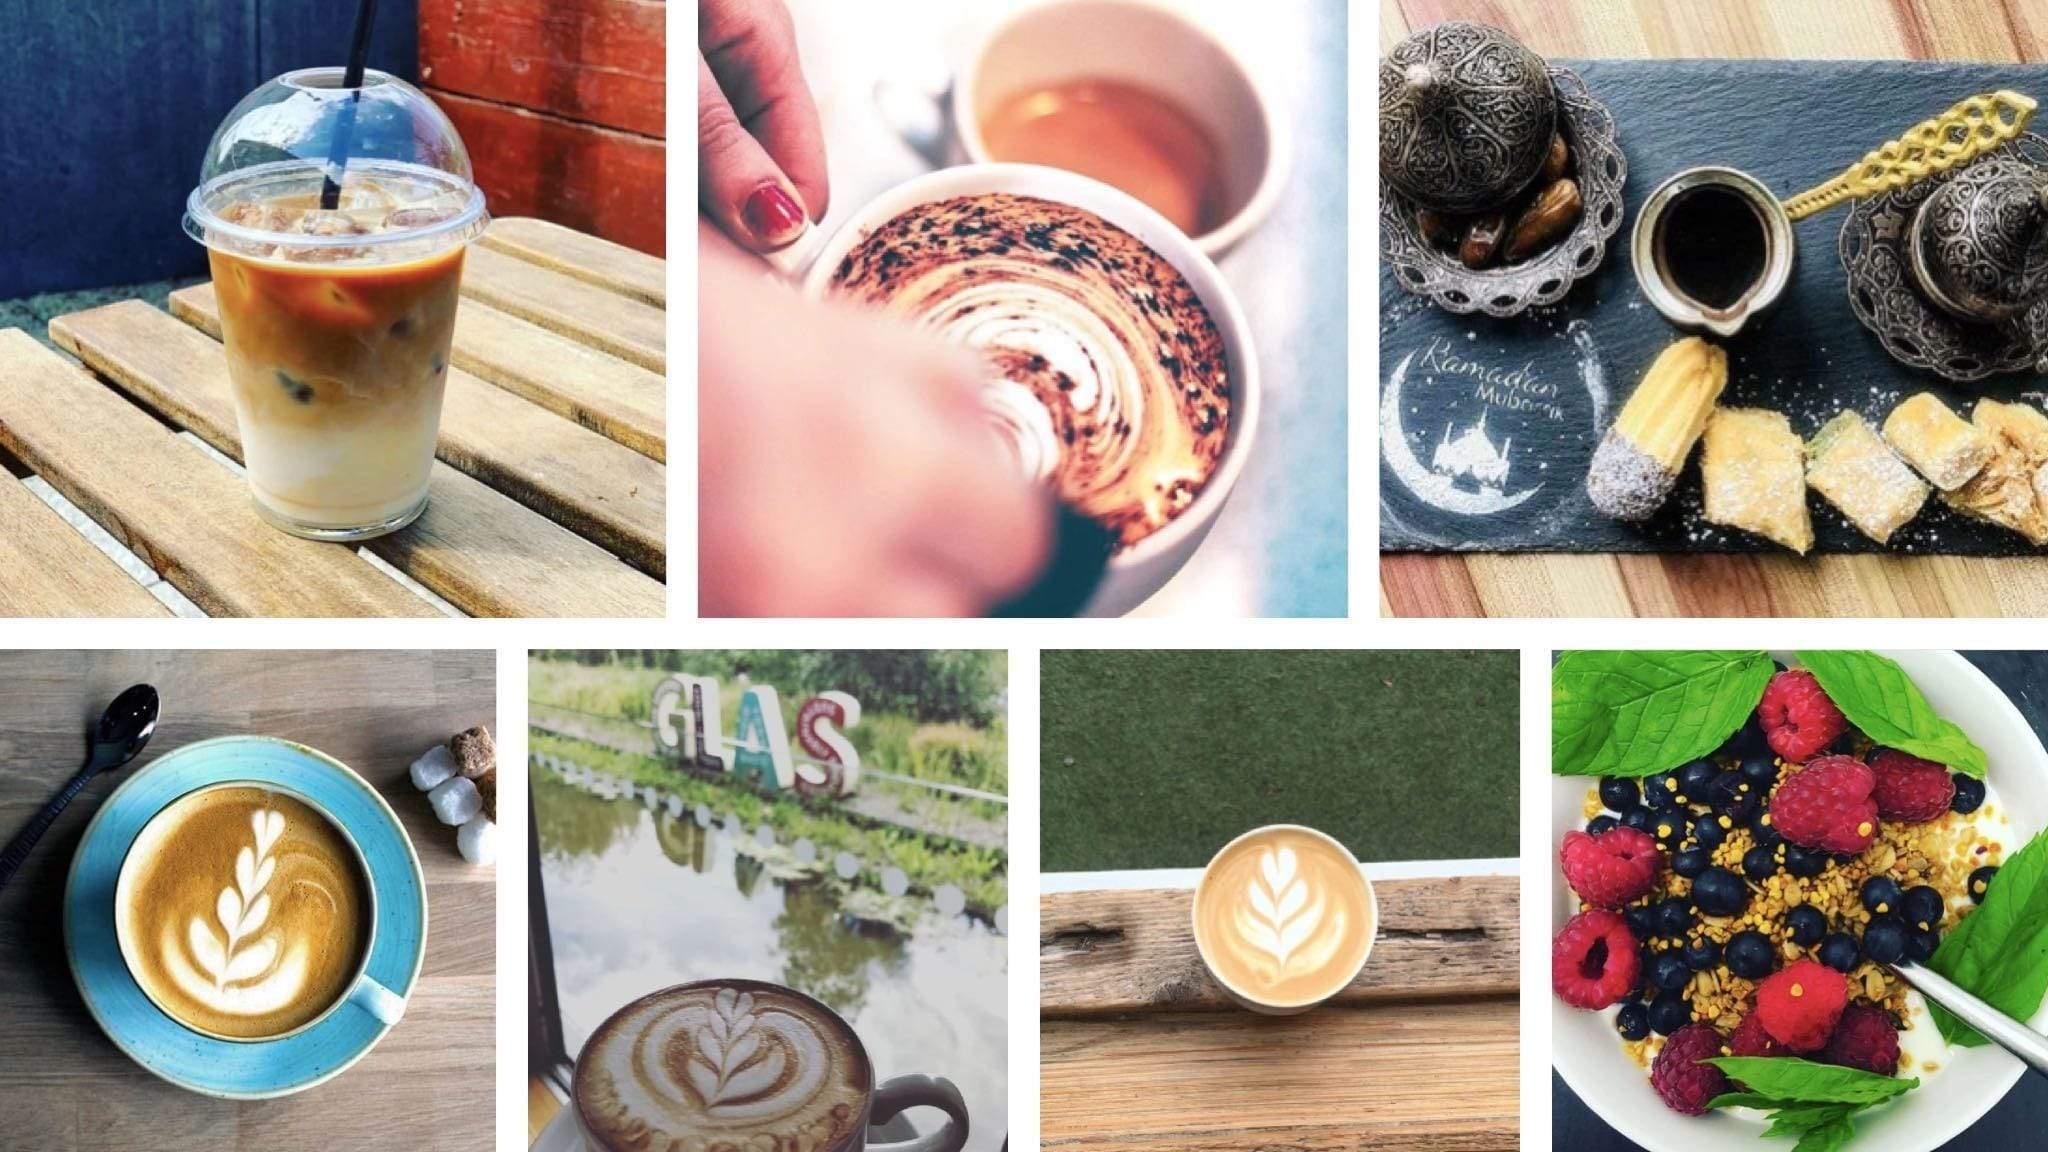 The Best Cafes in Dundrum! - Gym+Coffee